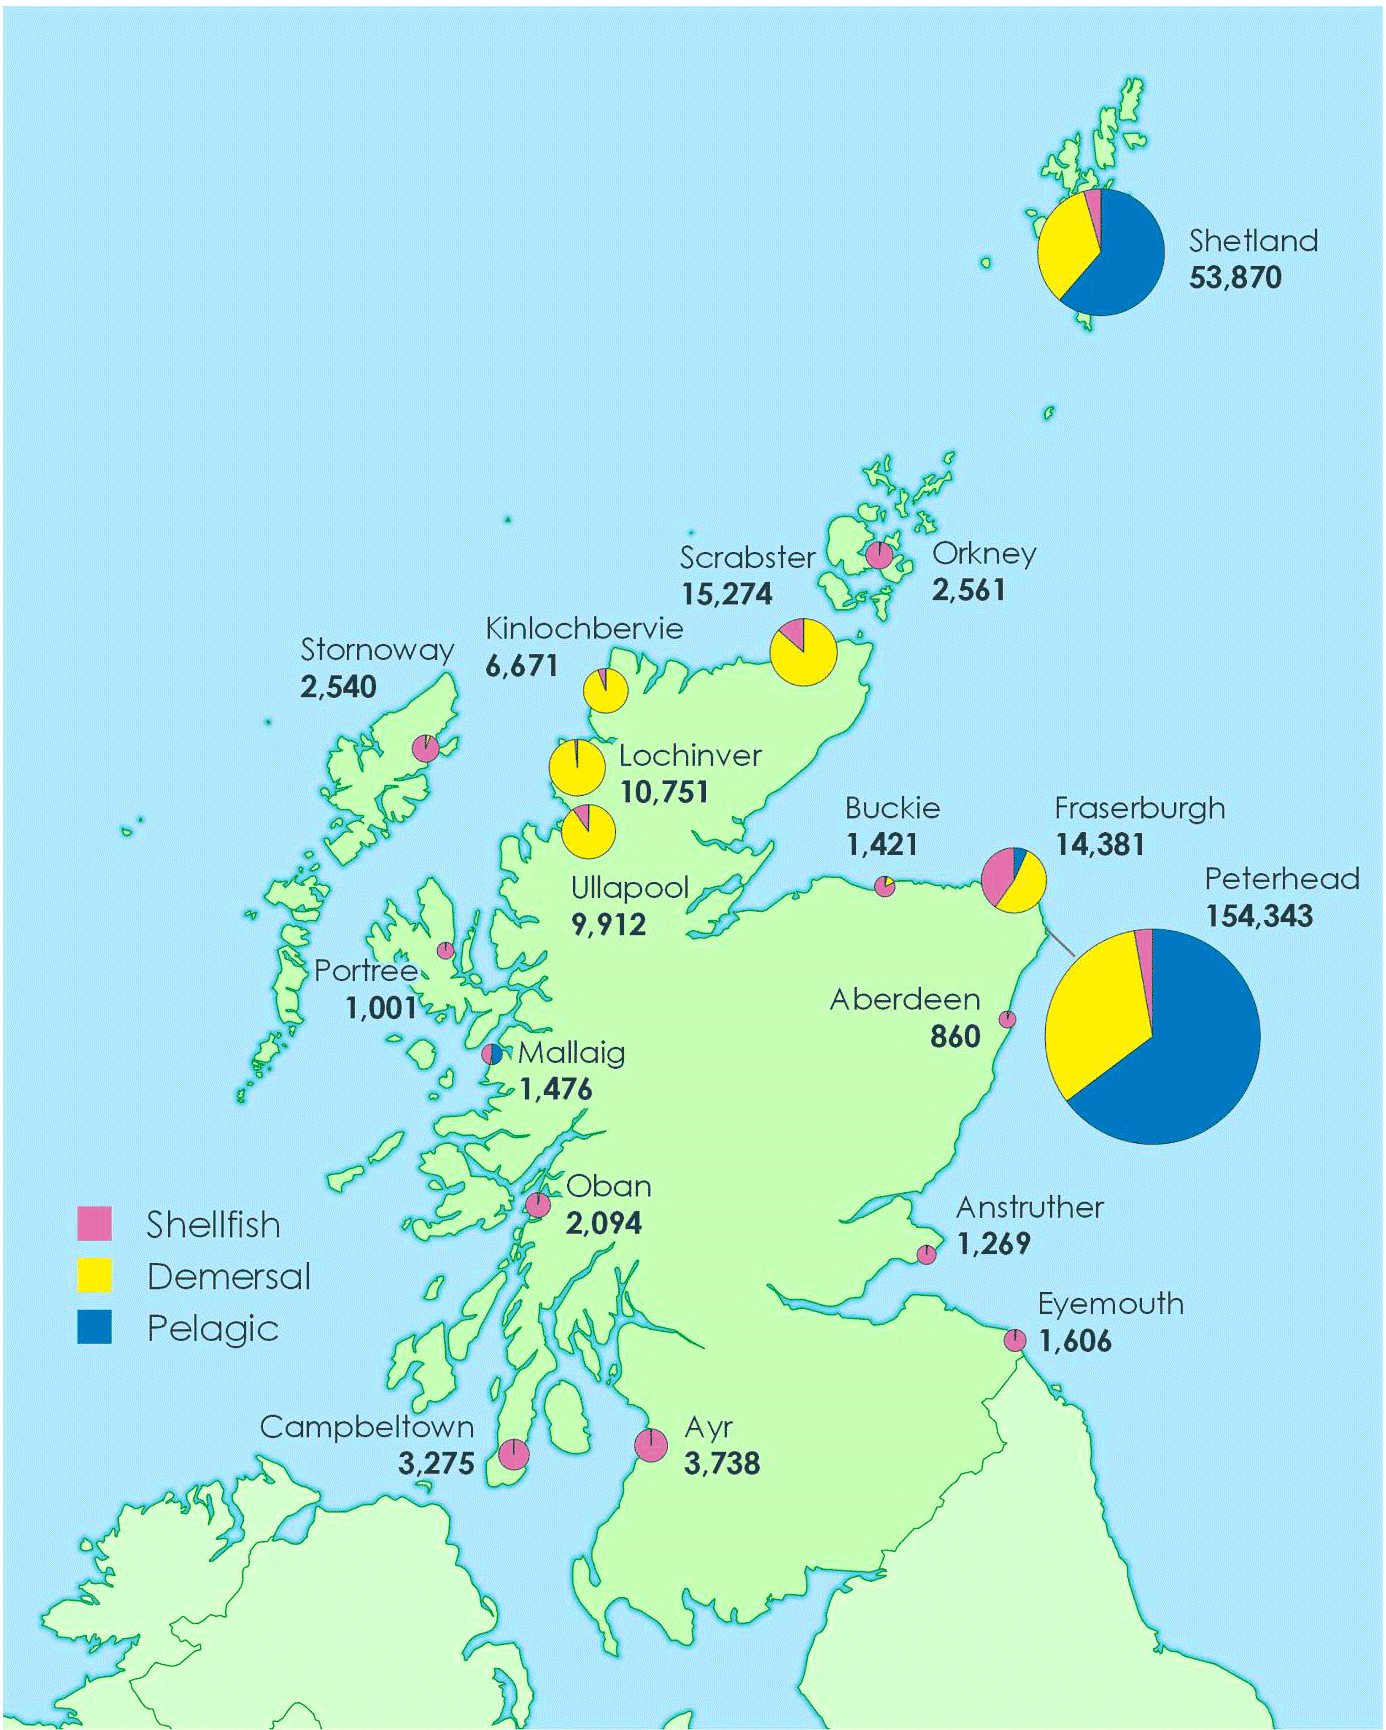 Tonnage landed into Scotland by all vessels by district and species type in 2020